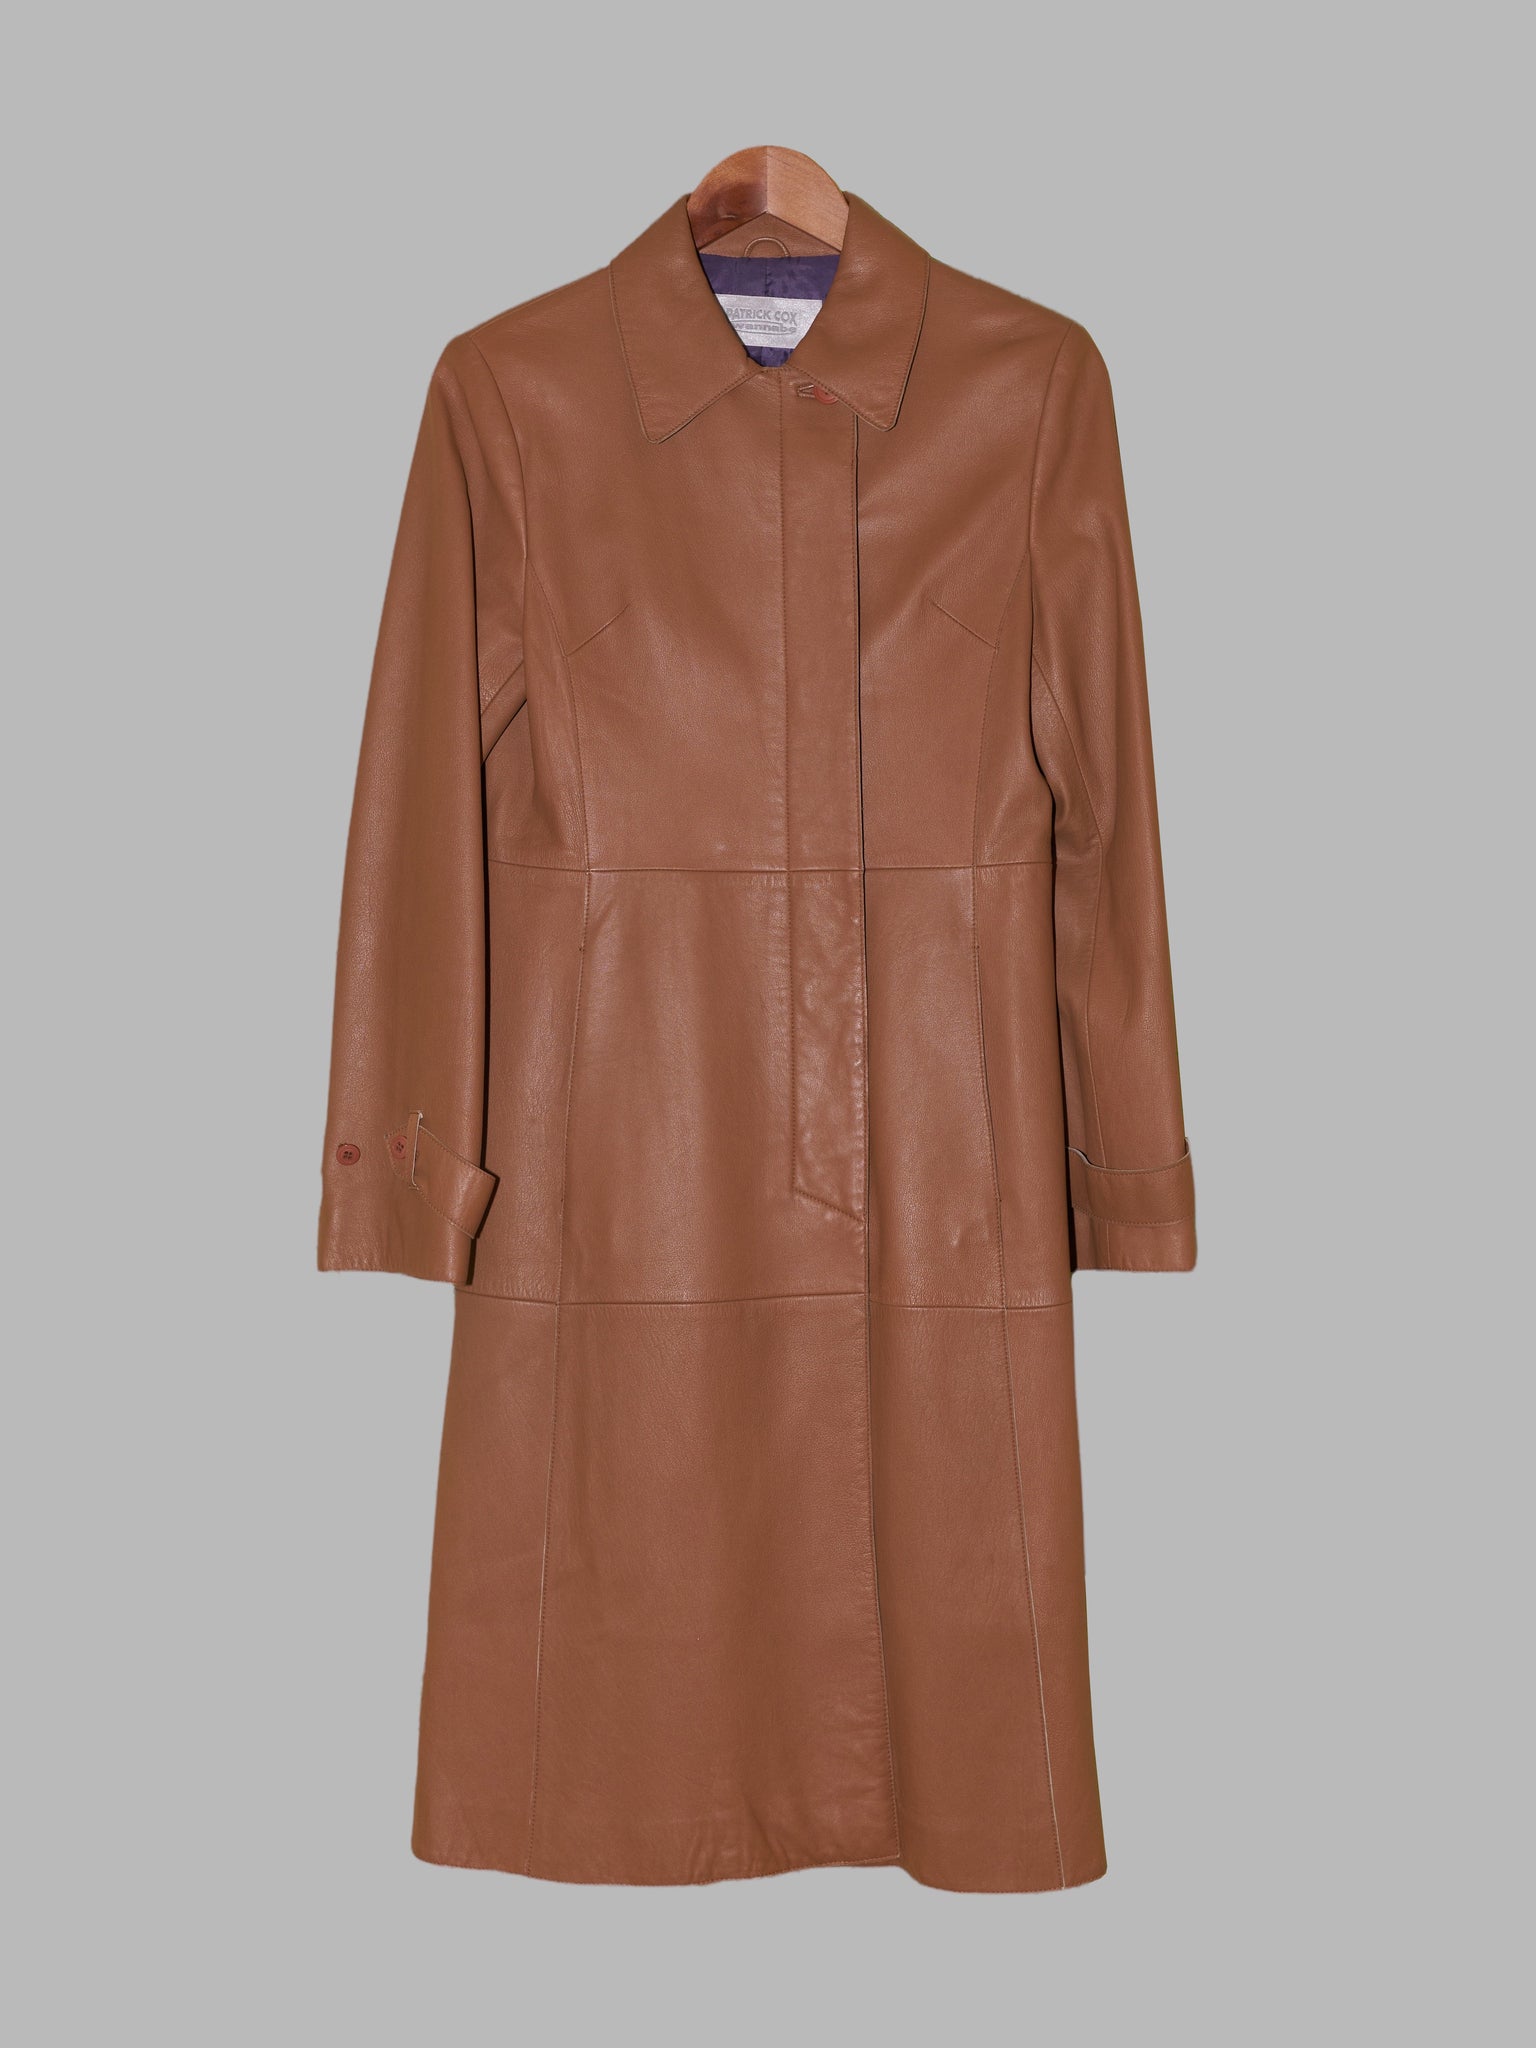 Patrick Cox Wannabe 1990s brown leather covered placket coat